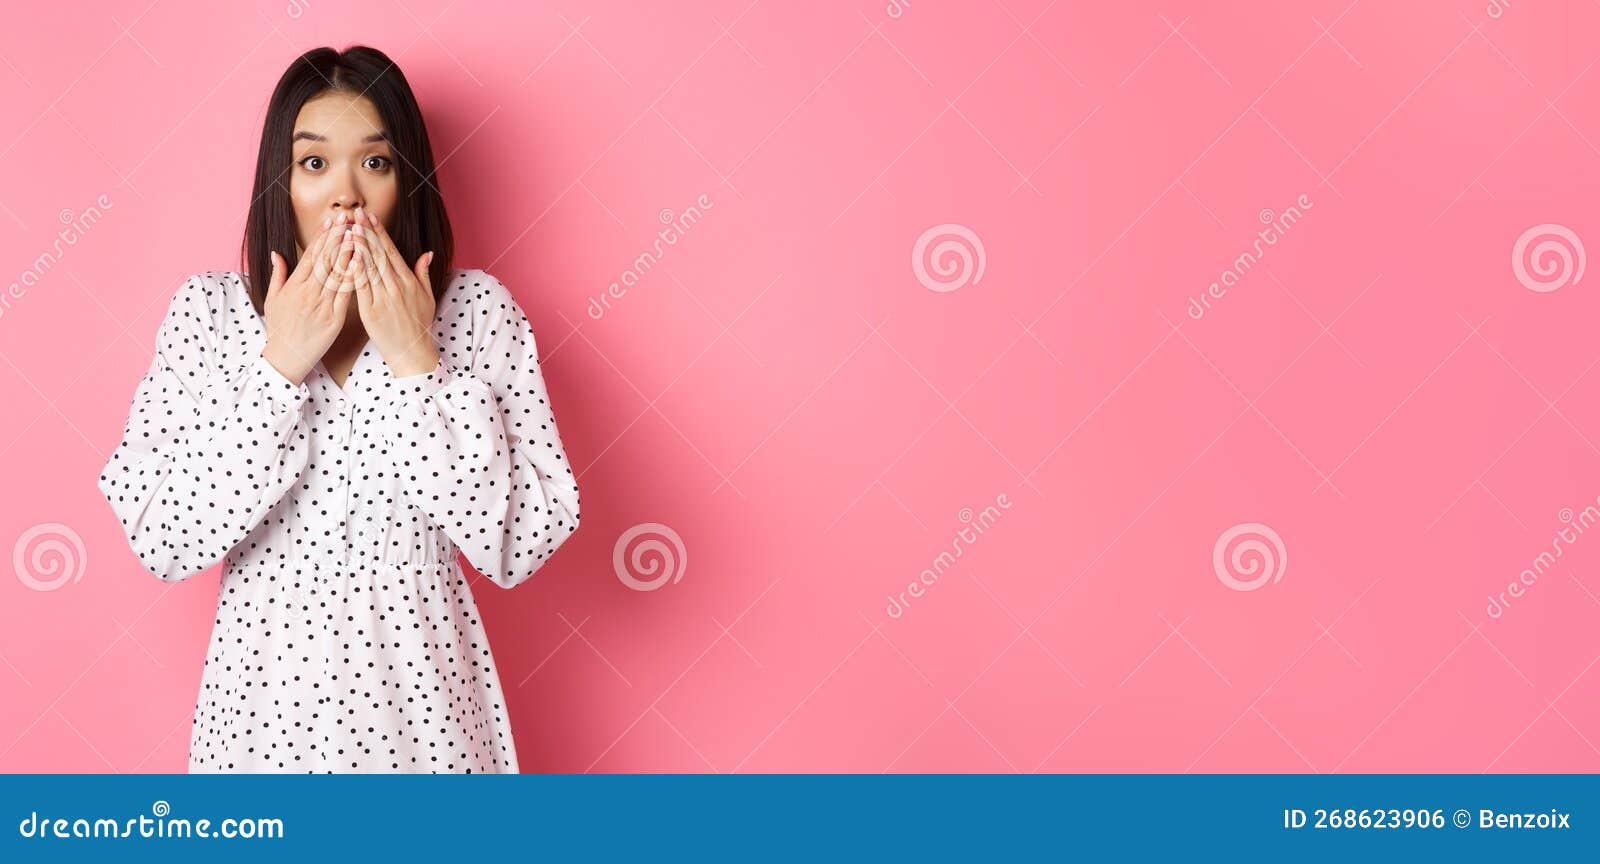 Worried Asian Girl In Dress Looking Concerned Cover Mouth And Gasping Staring At Camera